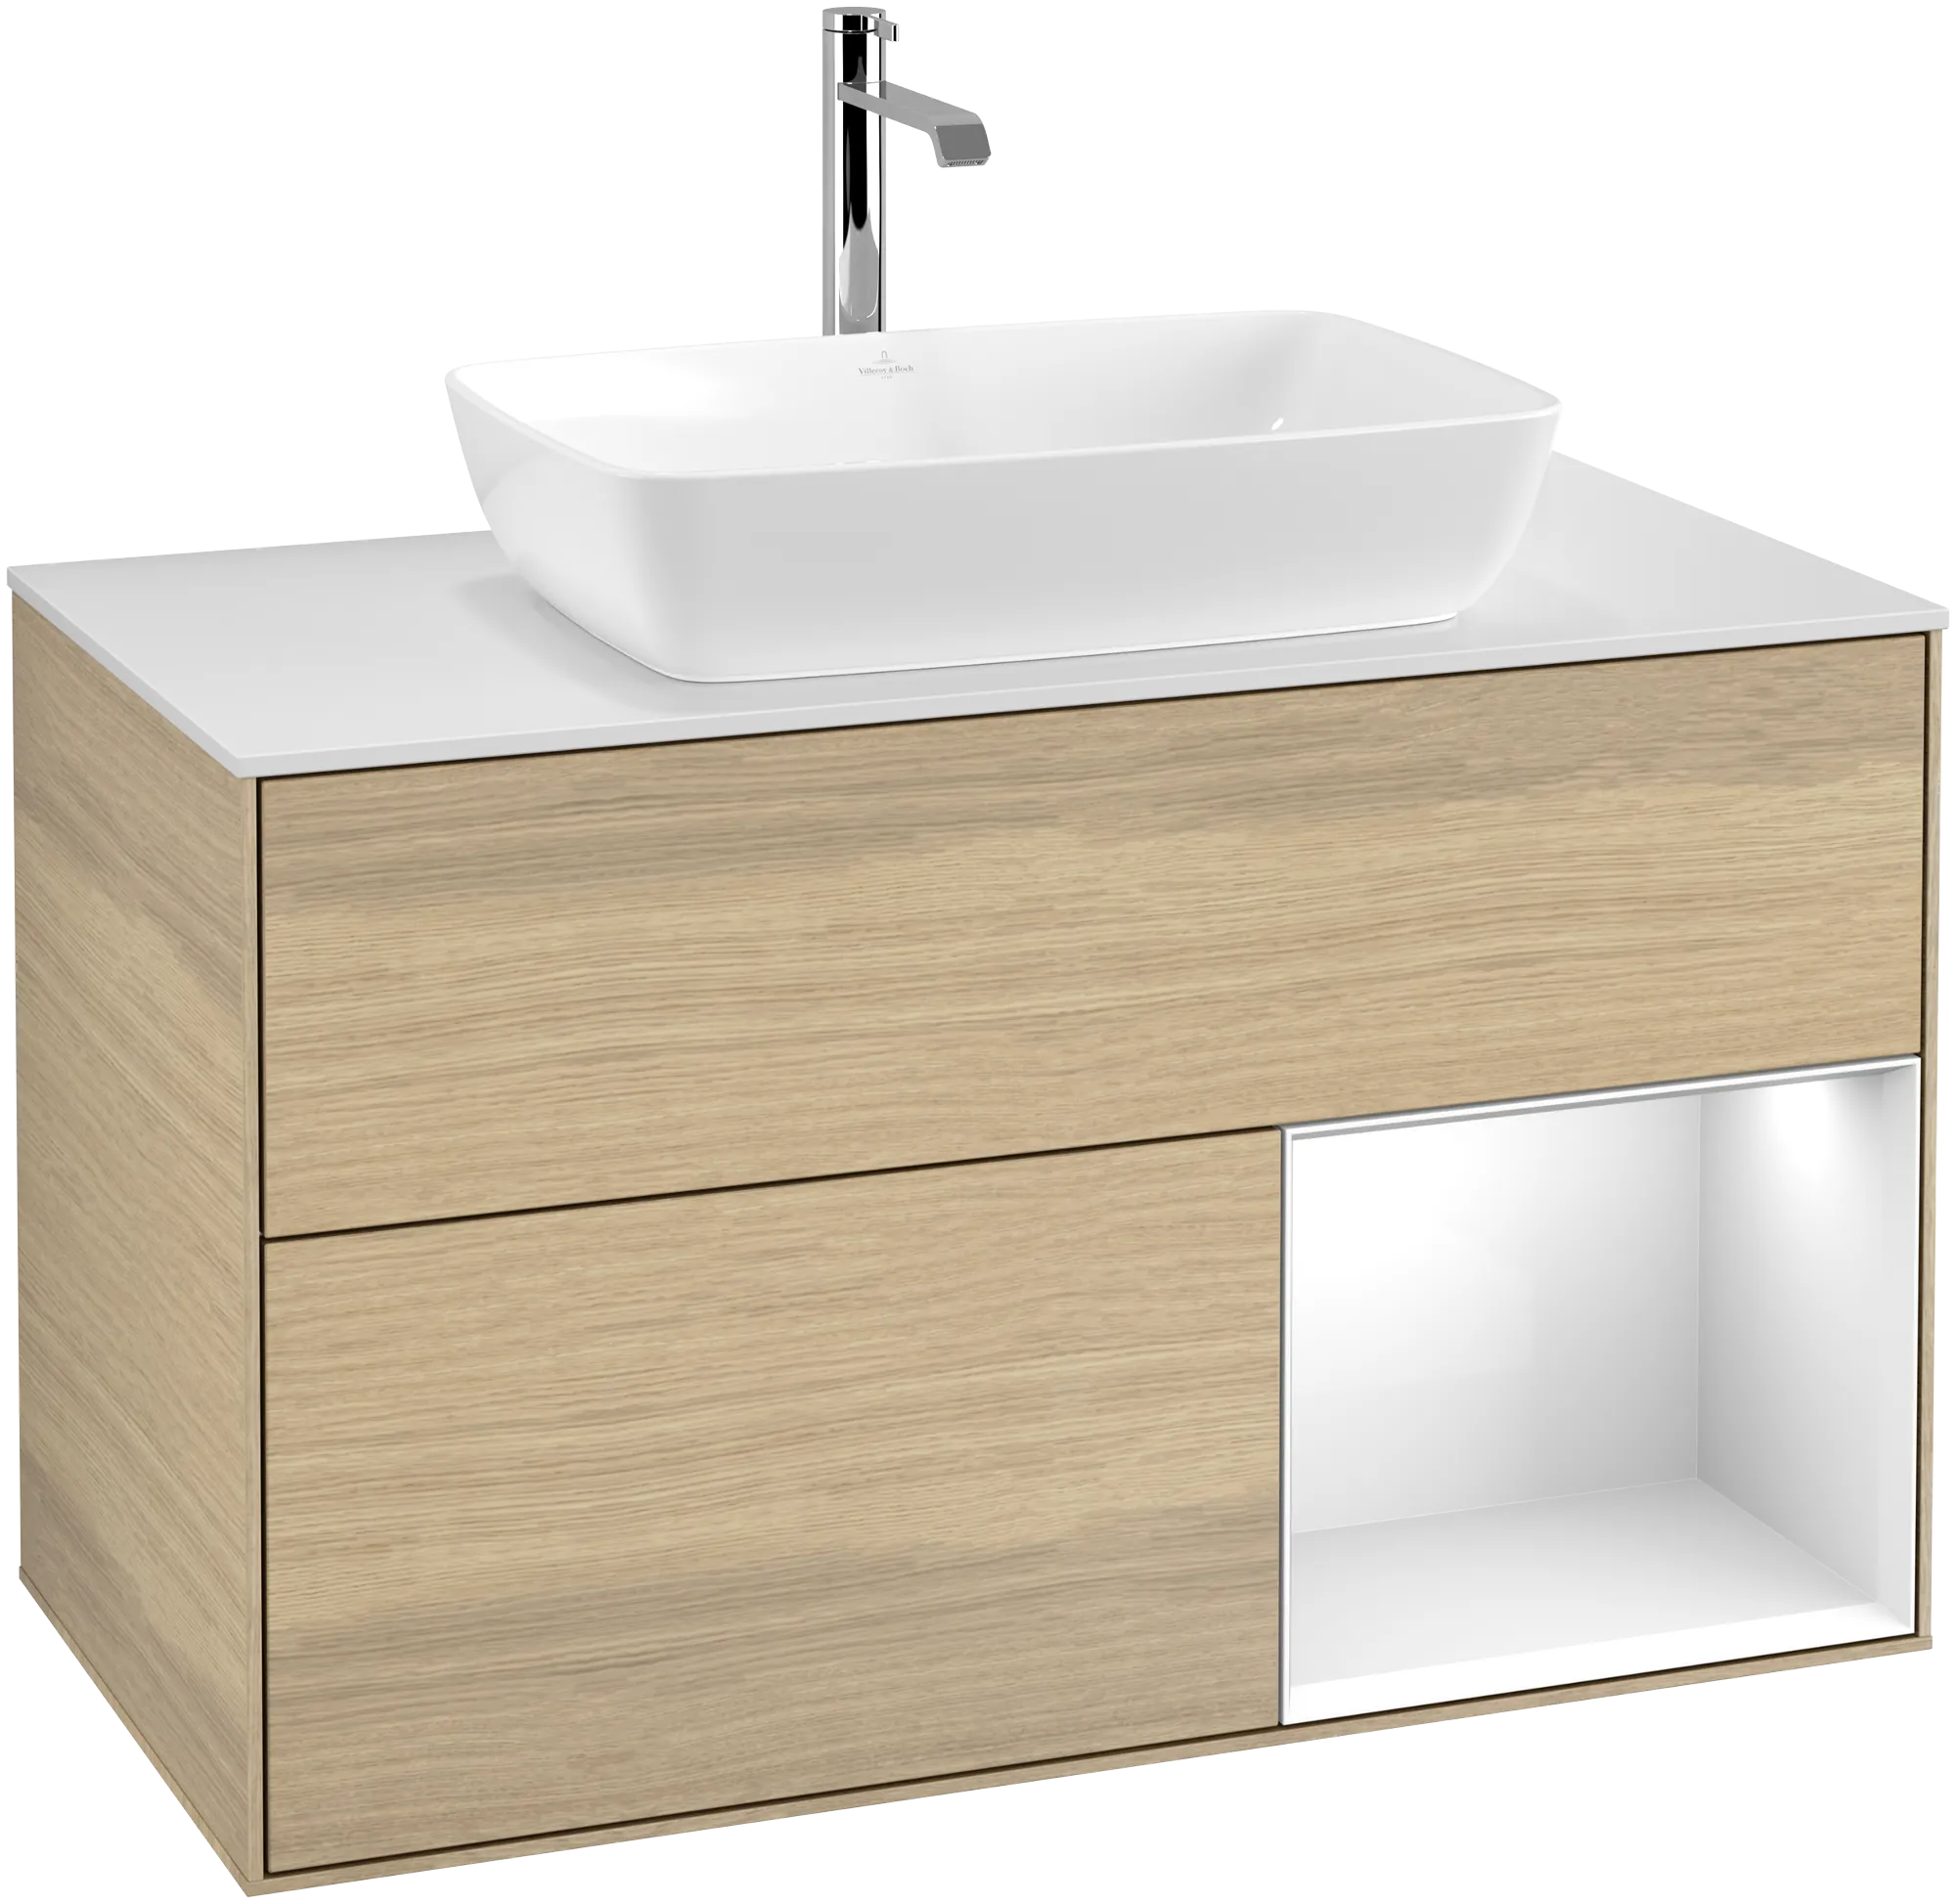 Obrázek VILLEROY BOCH Finion Vanity unit, with lighting, 2 pull-out compartments, 1000 x 603 x 501 mm, Oak Veneer / Glossy White Lacquer / Glass White Matt #G781GFPC